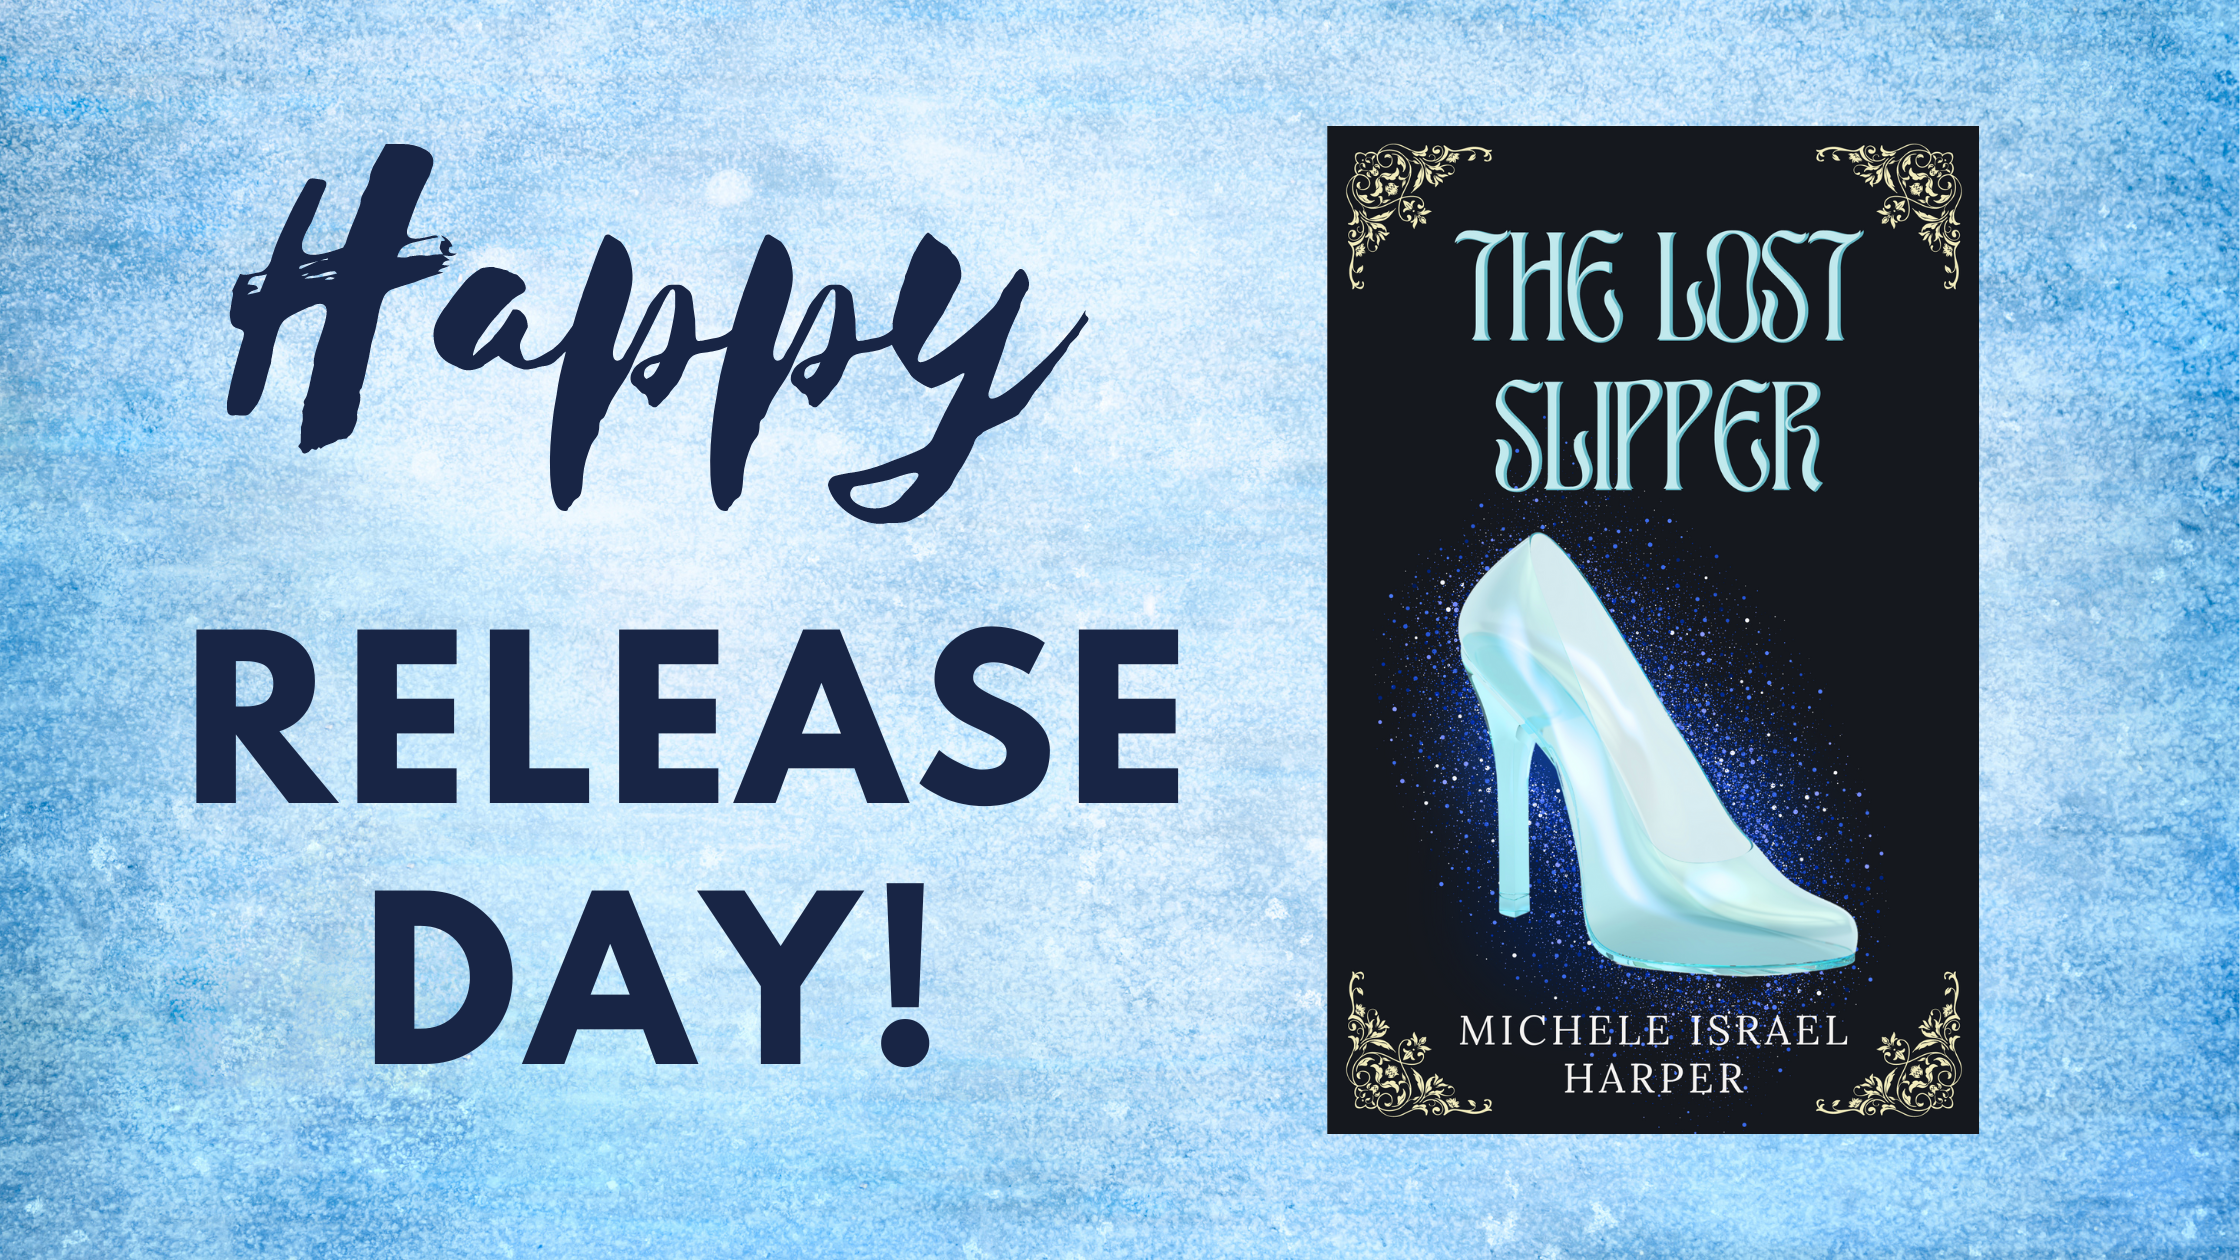 Lost Slipper Releases Today!